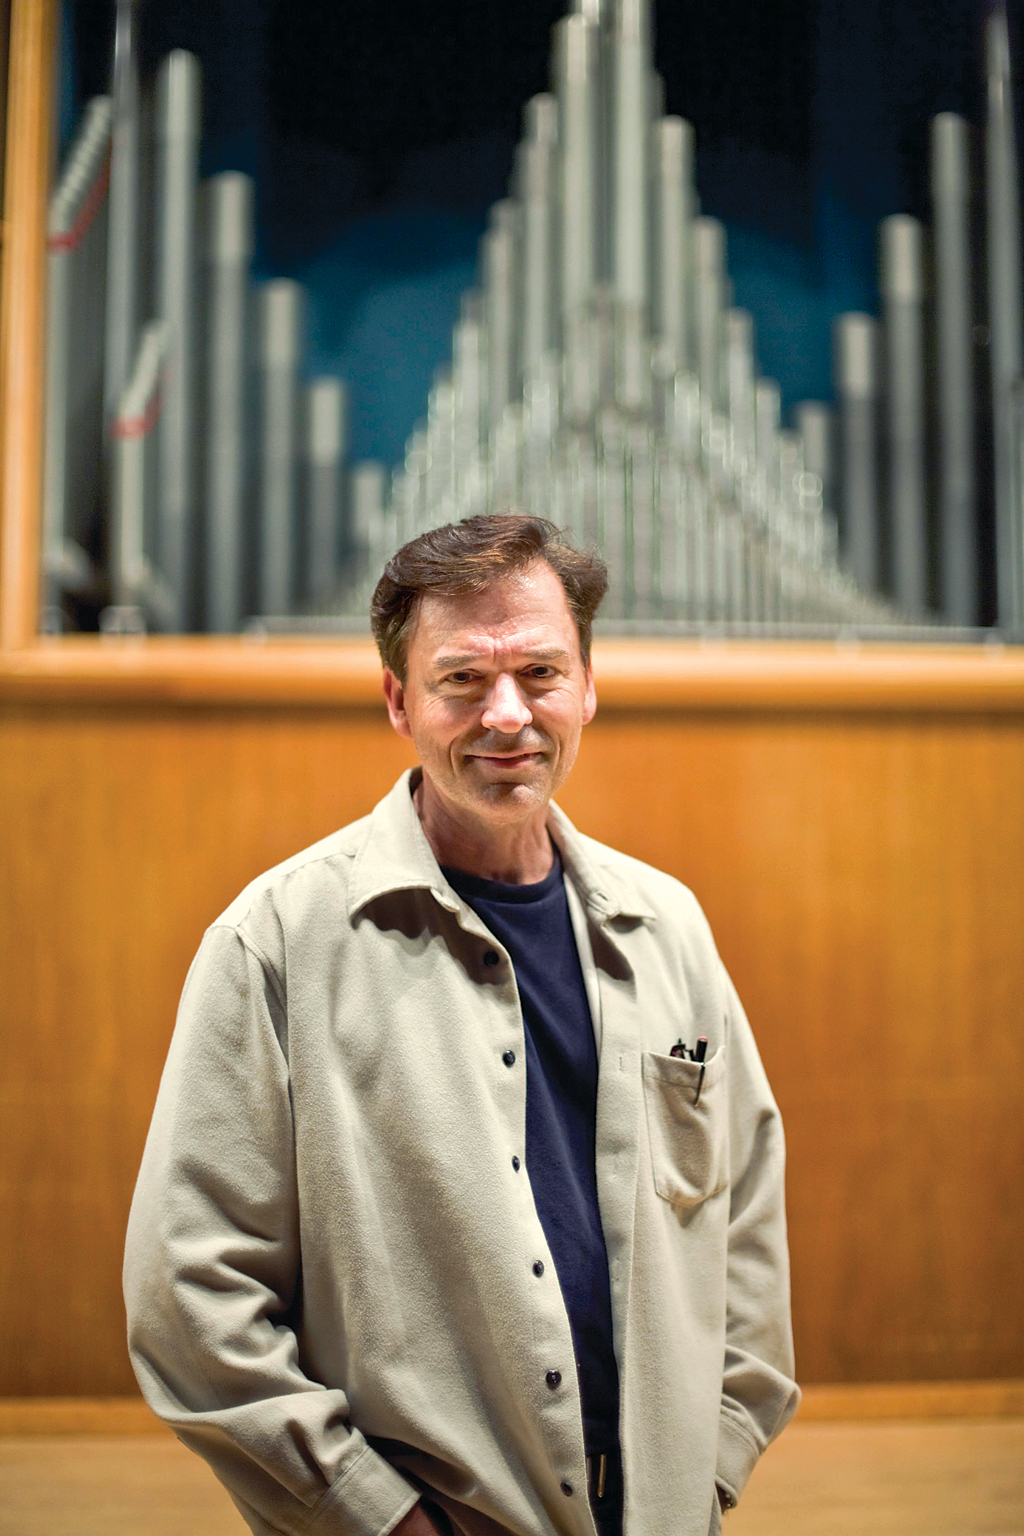 Amick Byram, guest director, held auditions for the Biola Conservatory’s production of “Into the Woods.” Byram is a two-time, Grammy-nominated vocalist, and has sung in several films including “Shrek” and “The Lion King.”